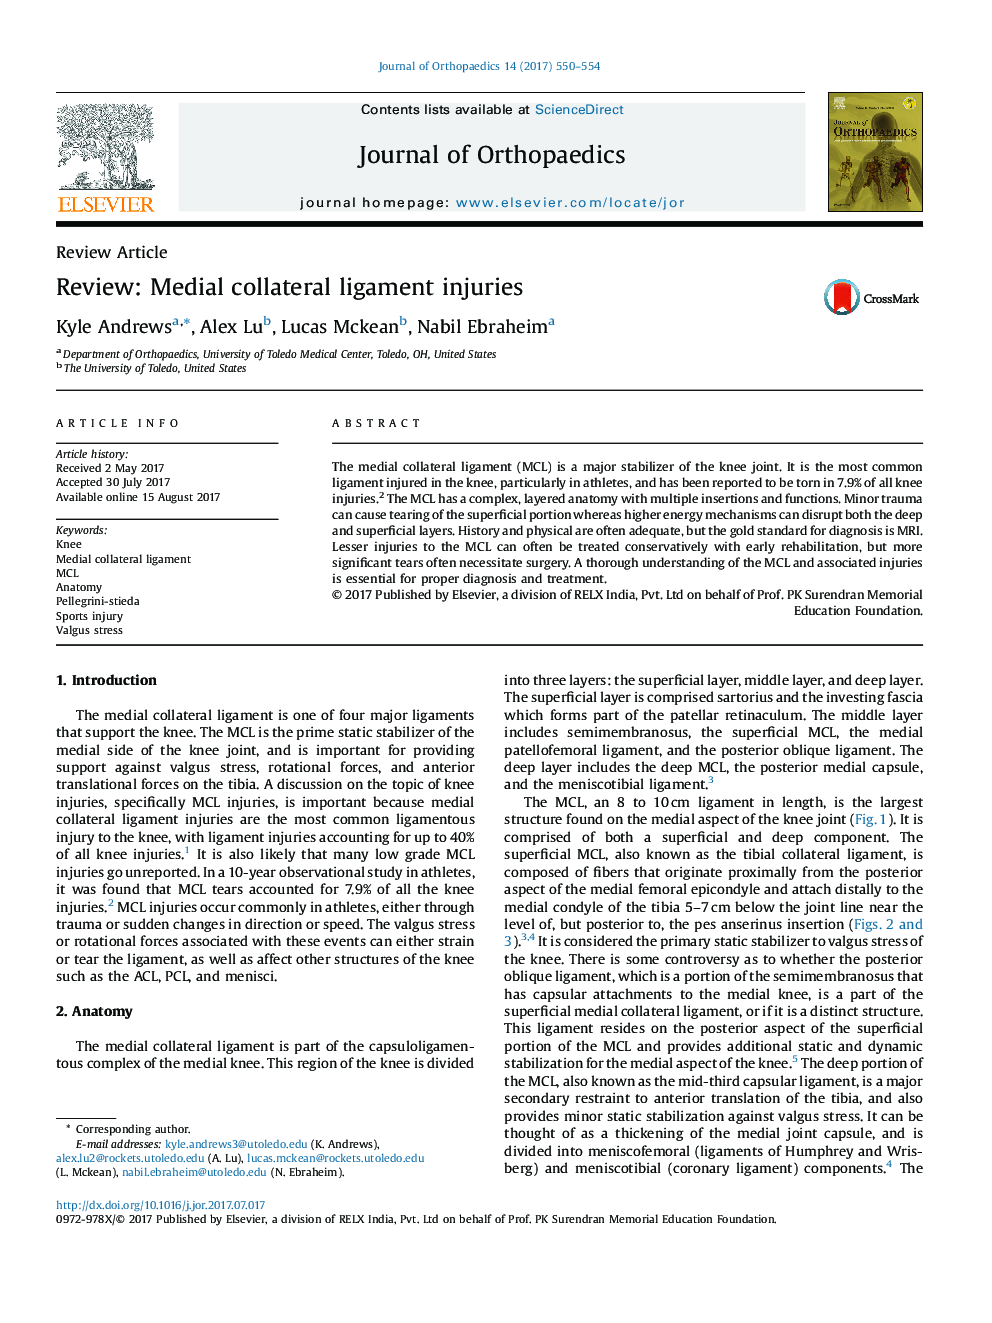 Review: Medial collateral ligament injuries